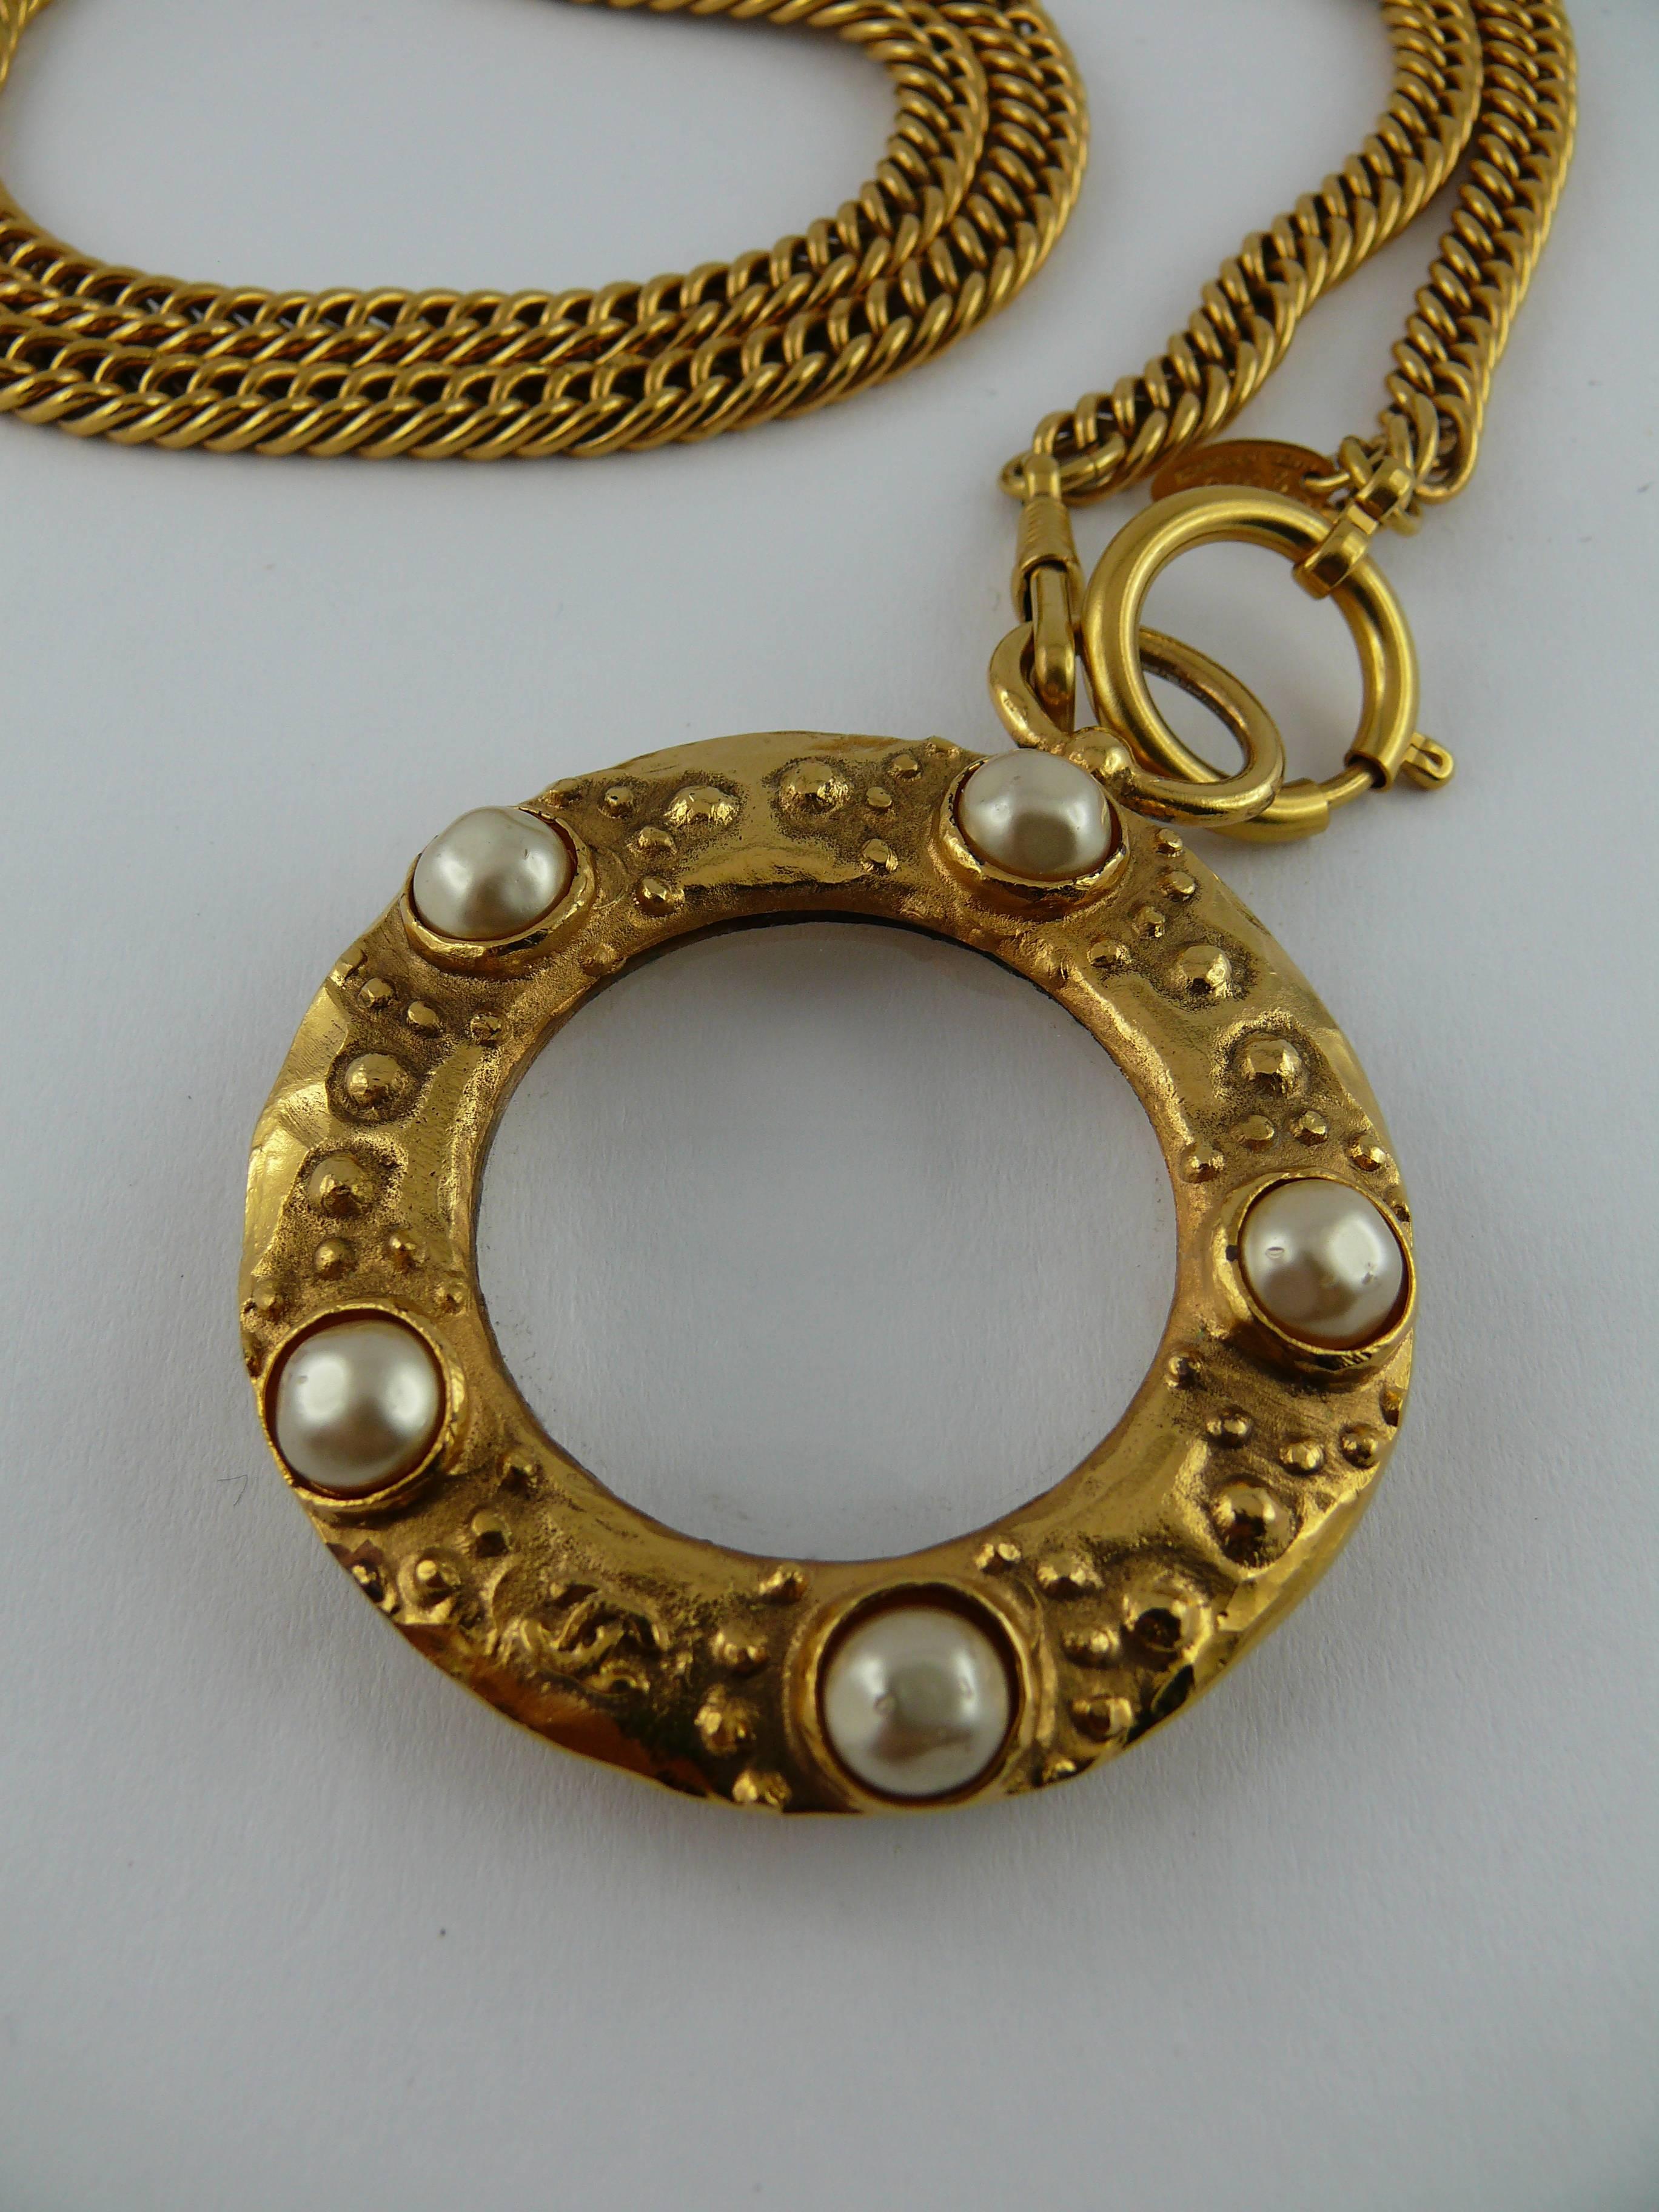 CHANEL vintage sautoir necklace featuring chunky gold tone chain link and magnifying glass pendant embellished with GRIPOIX faux pearls.

CC logo on both side of the pendant.

Jump ring closure.

Stamped CHANEL 2 3 Made in France.

Indicative